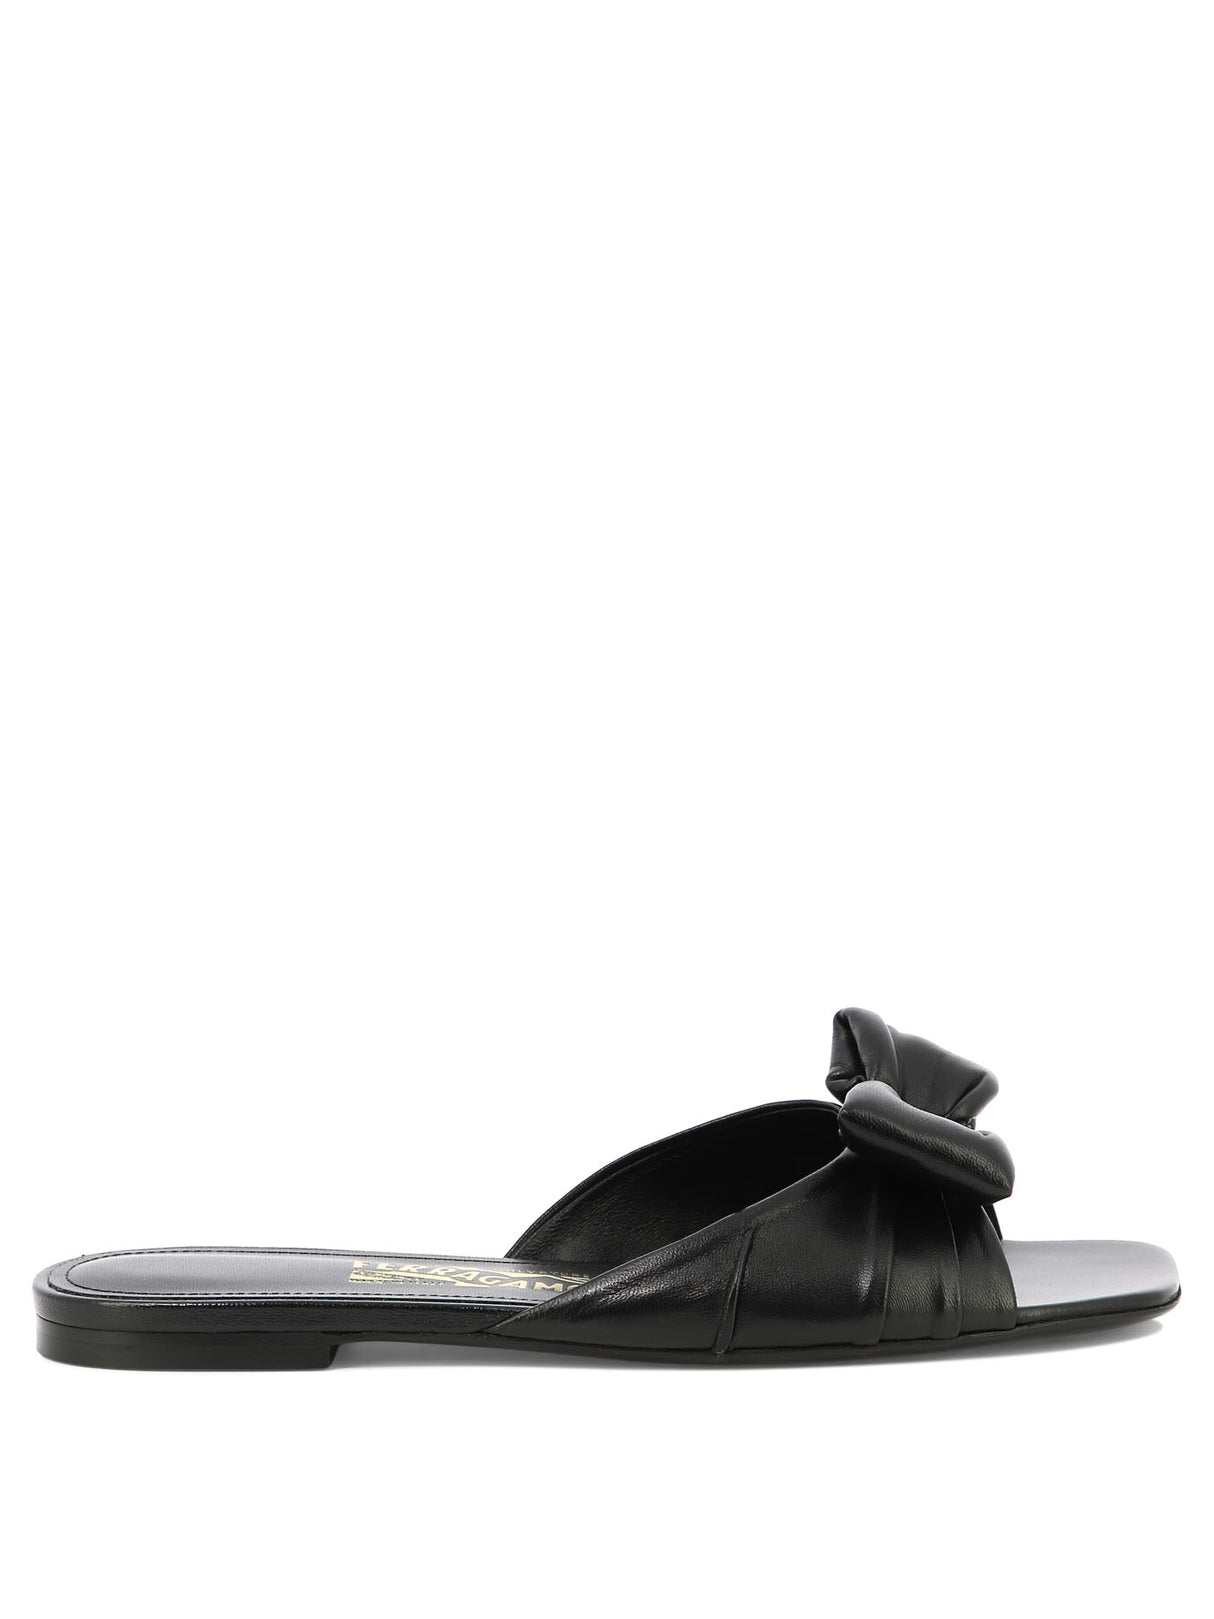 FERRAGAMO Black Leather Sandals for Women - SS24 Collection